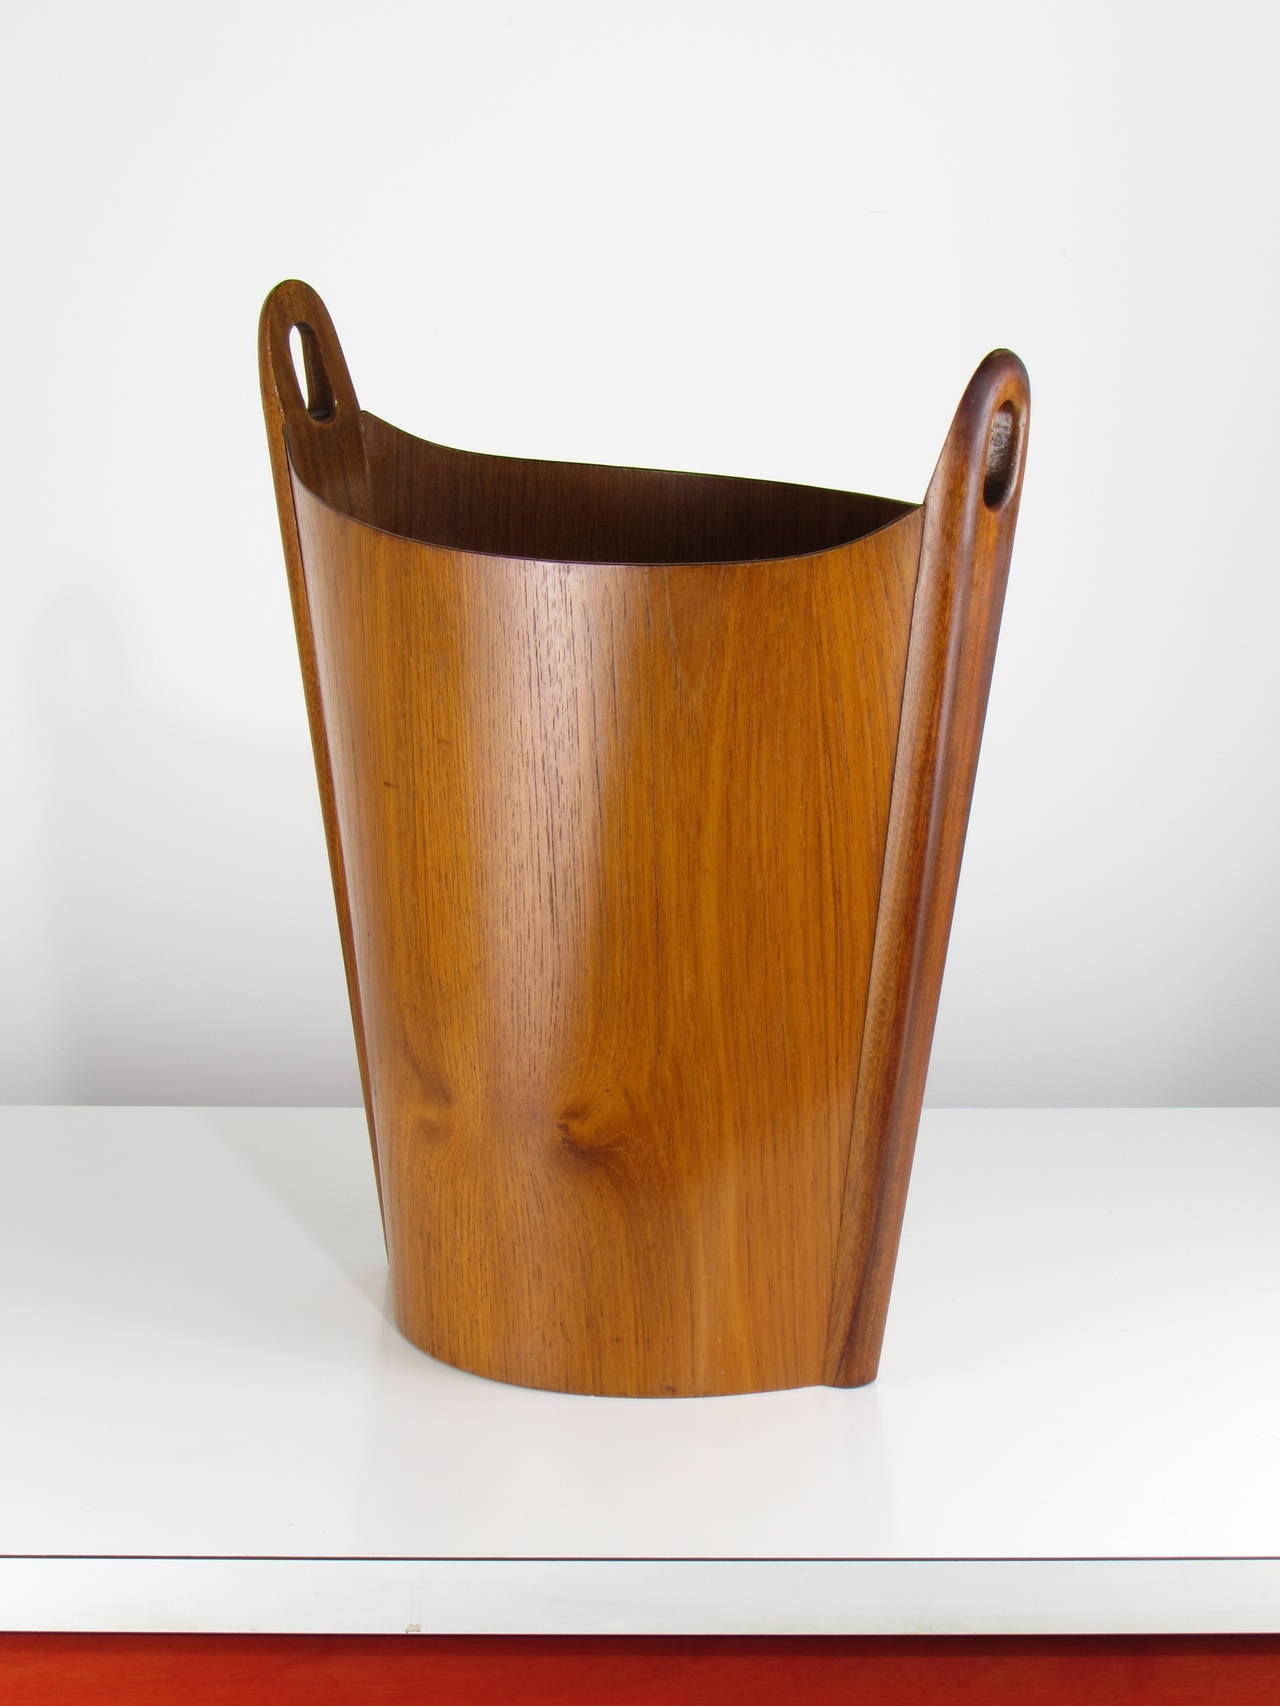 Gorgeous Heggen Teak Wastebasket Designed by Einar Barnes, Norway 1960s. Excellent vintage condition.

We offer free regular deliveries to NYC and Philadelphia area. Delivery to DC, MD, CT and MA are available if schedule permits, please message